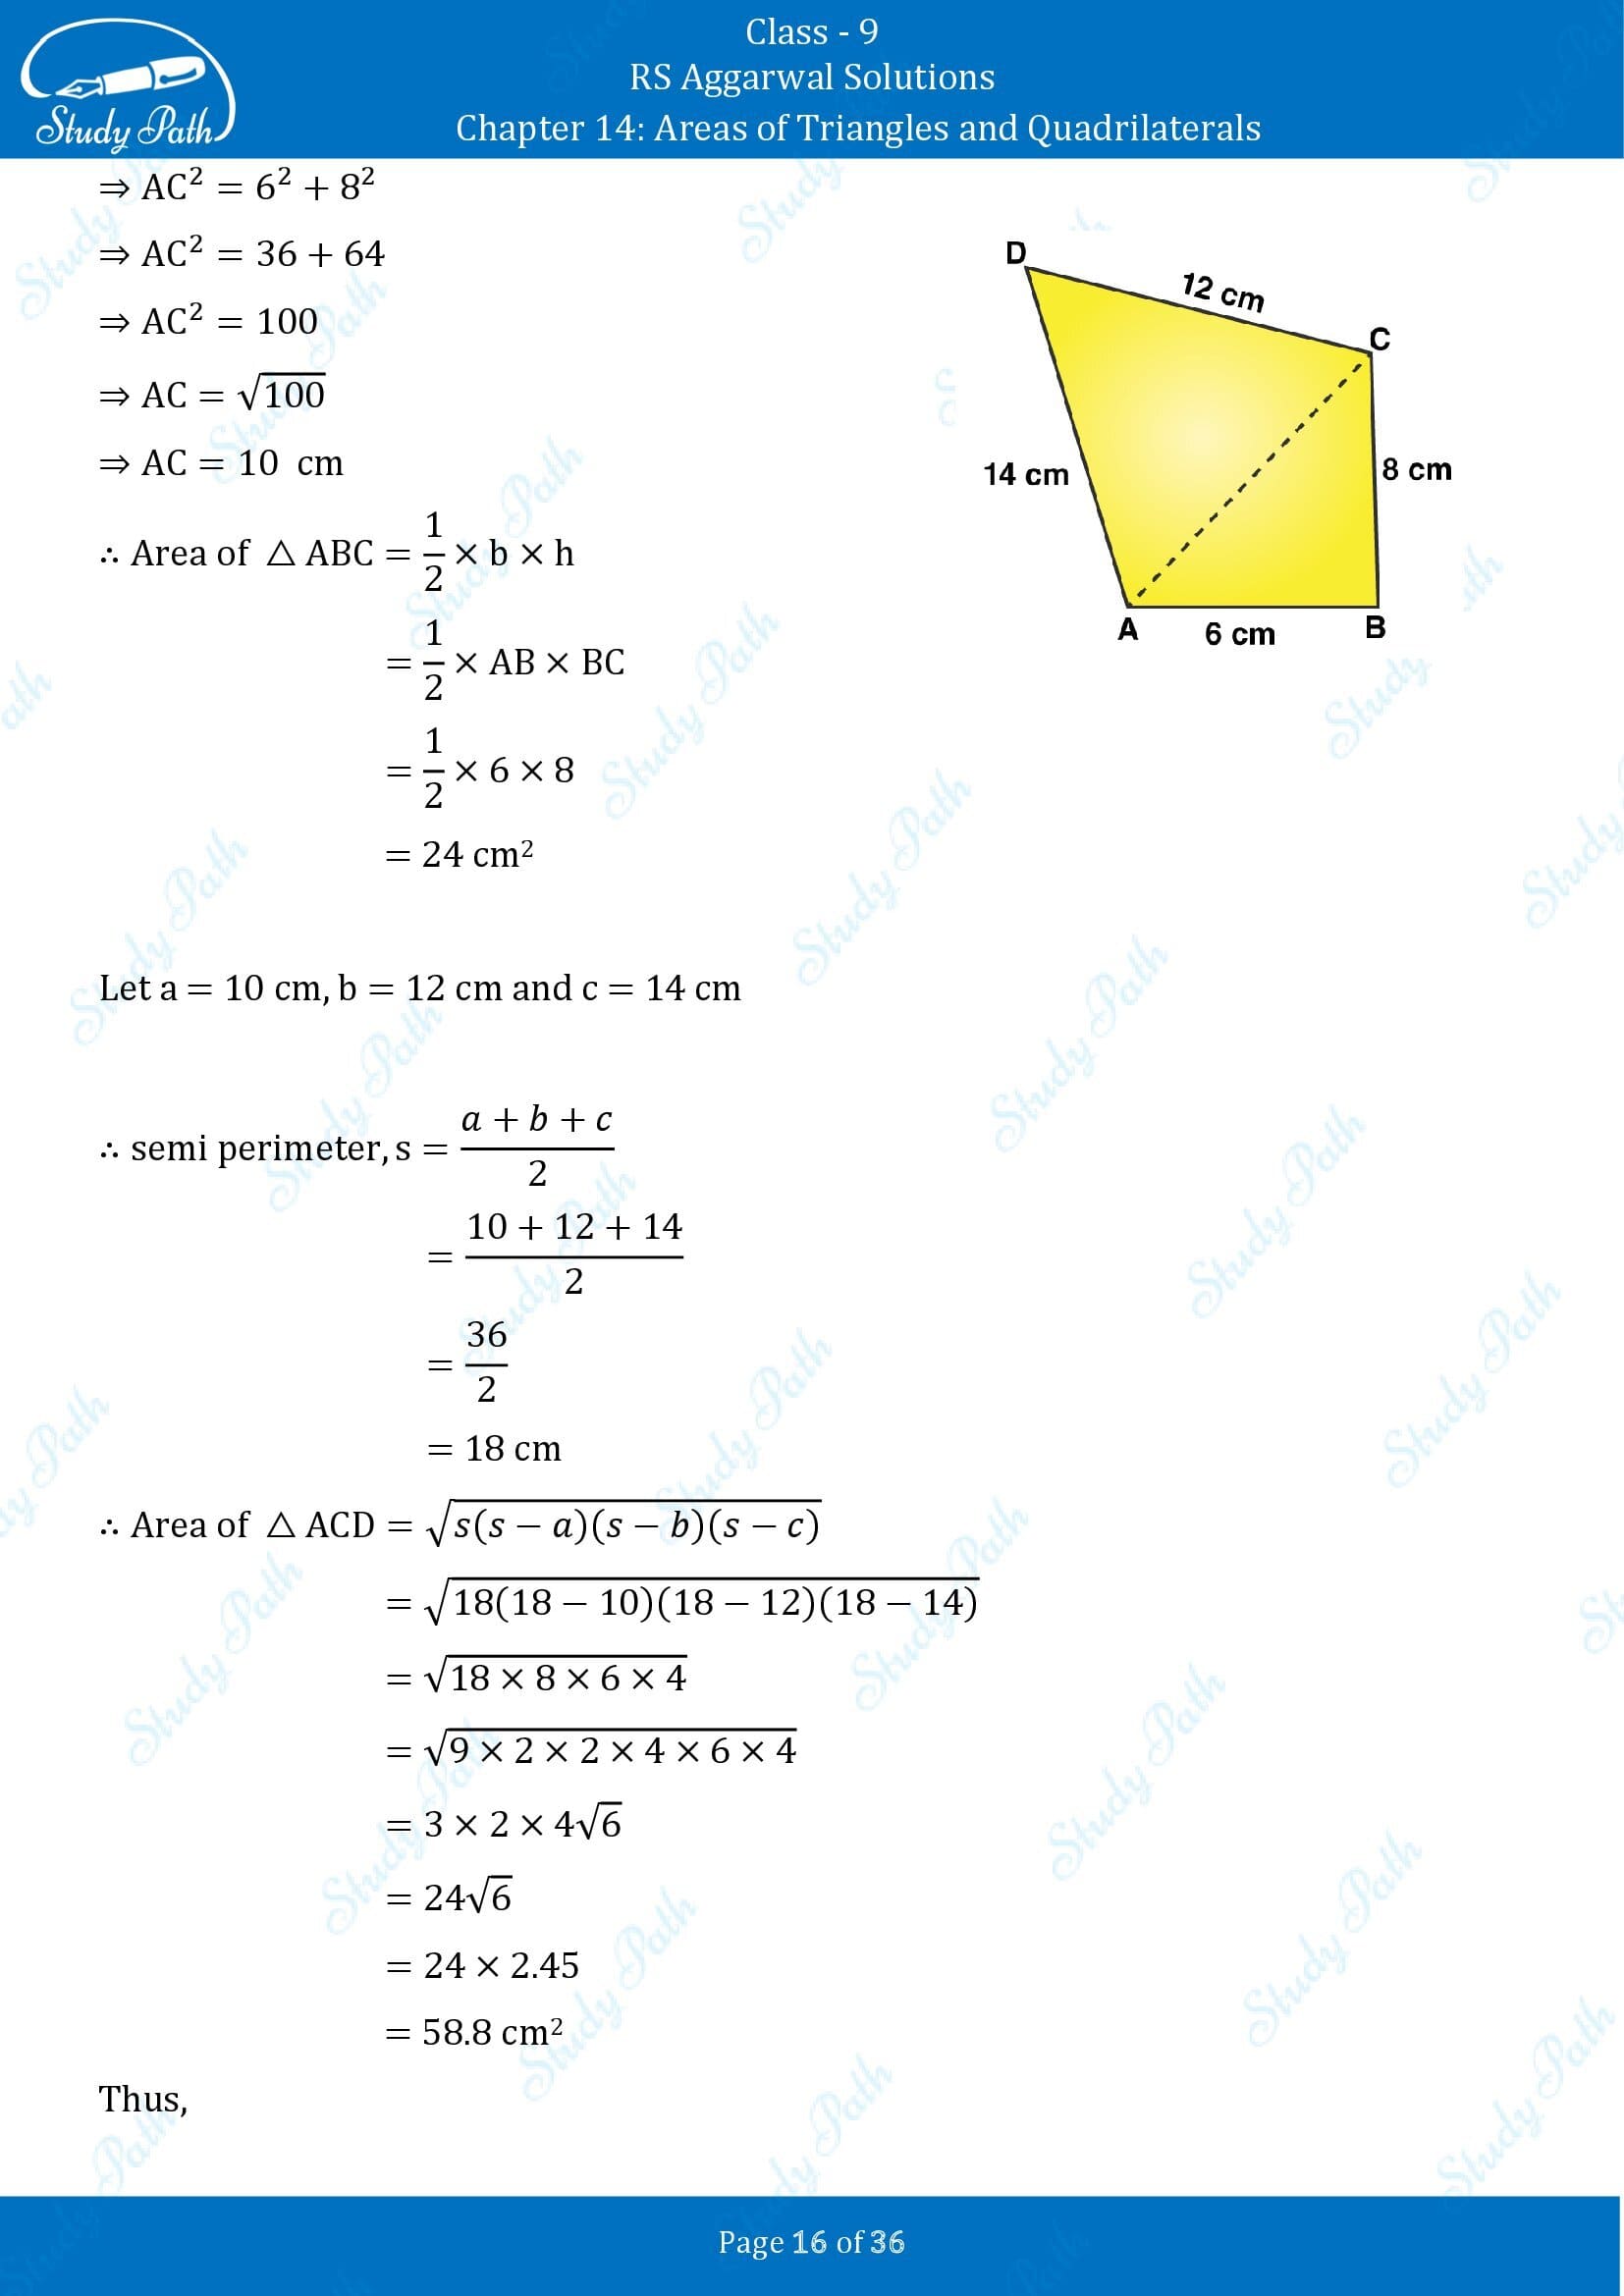 RS Aggarwal Solutions Class 9 Chapter 14 Areas of Triangles and Quadrilaterals Exercise 14 00016